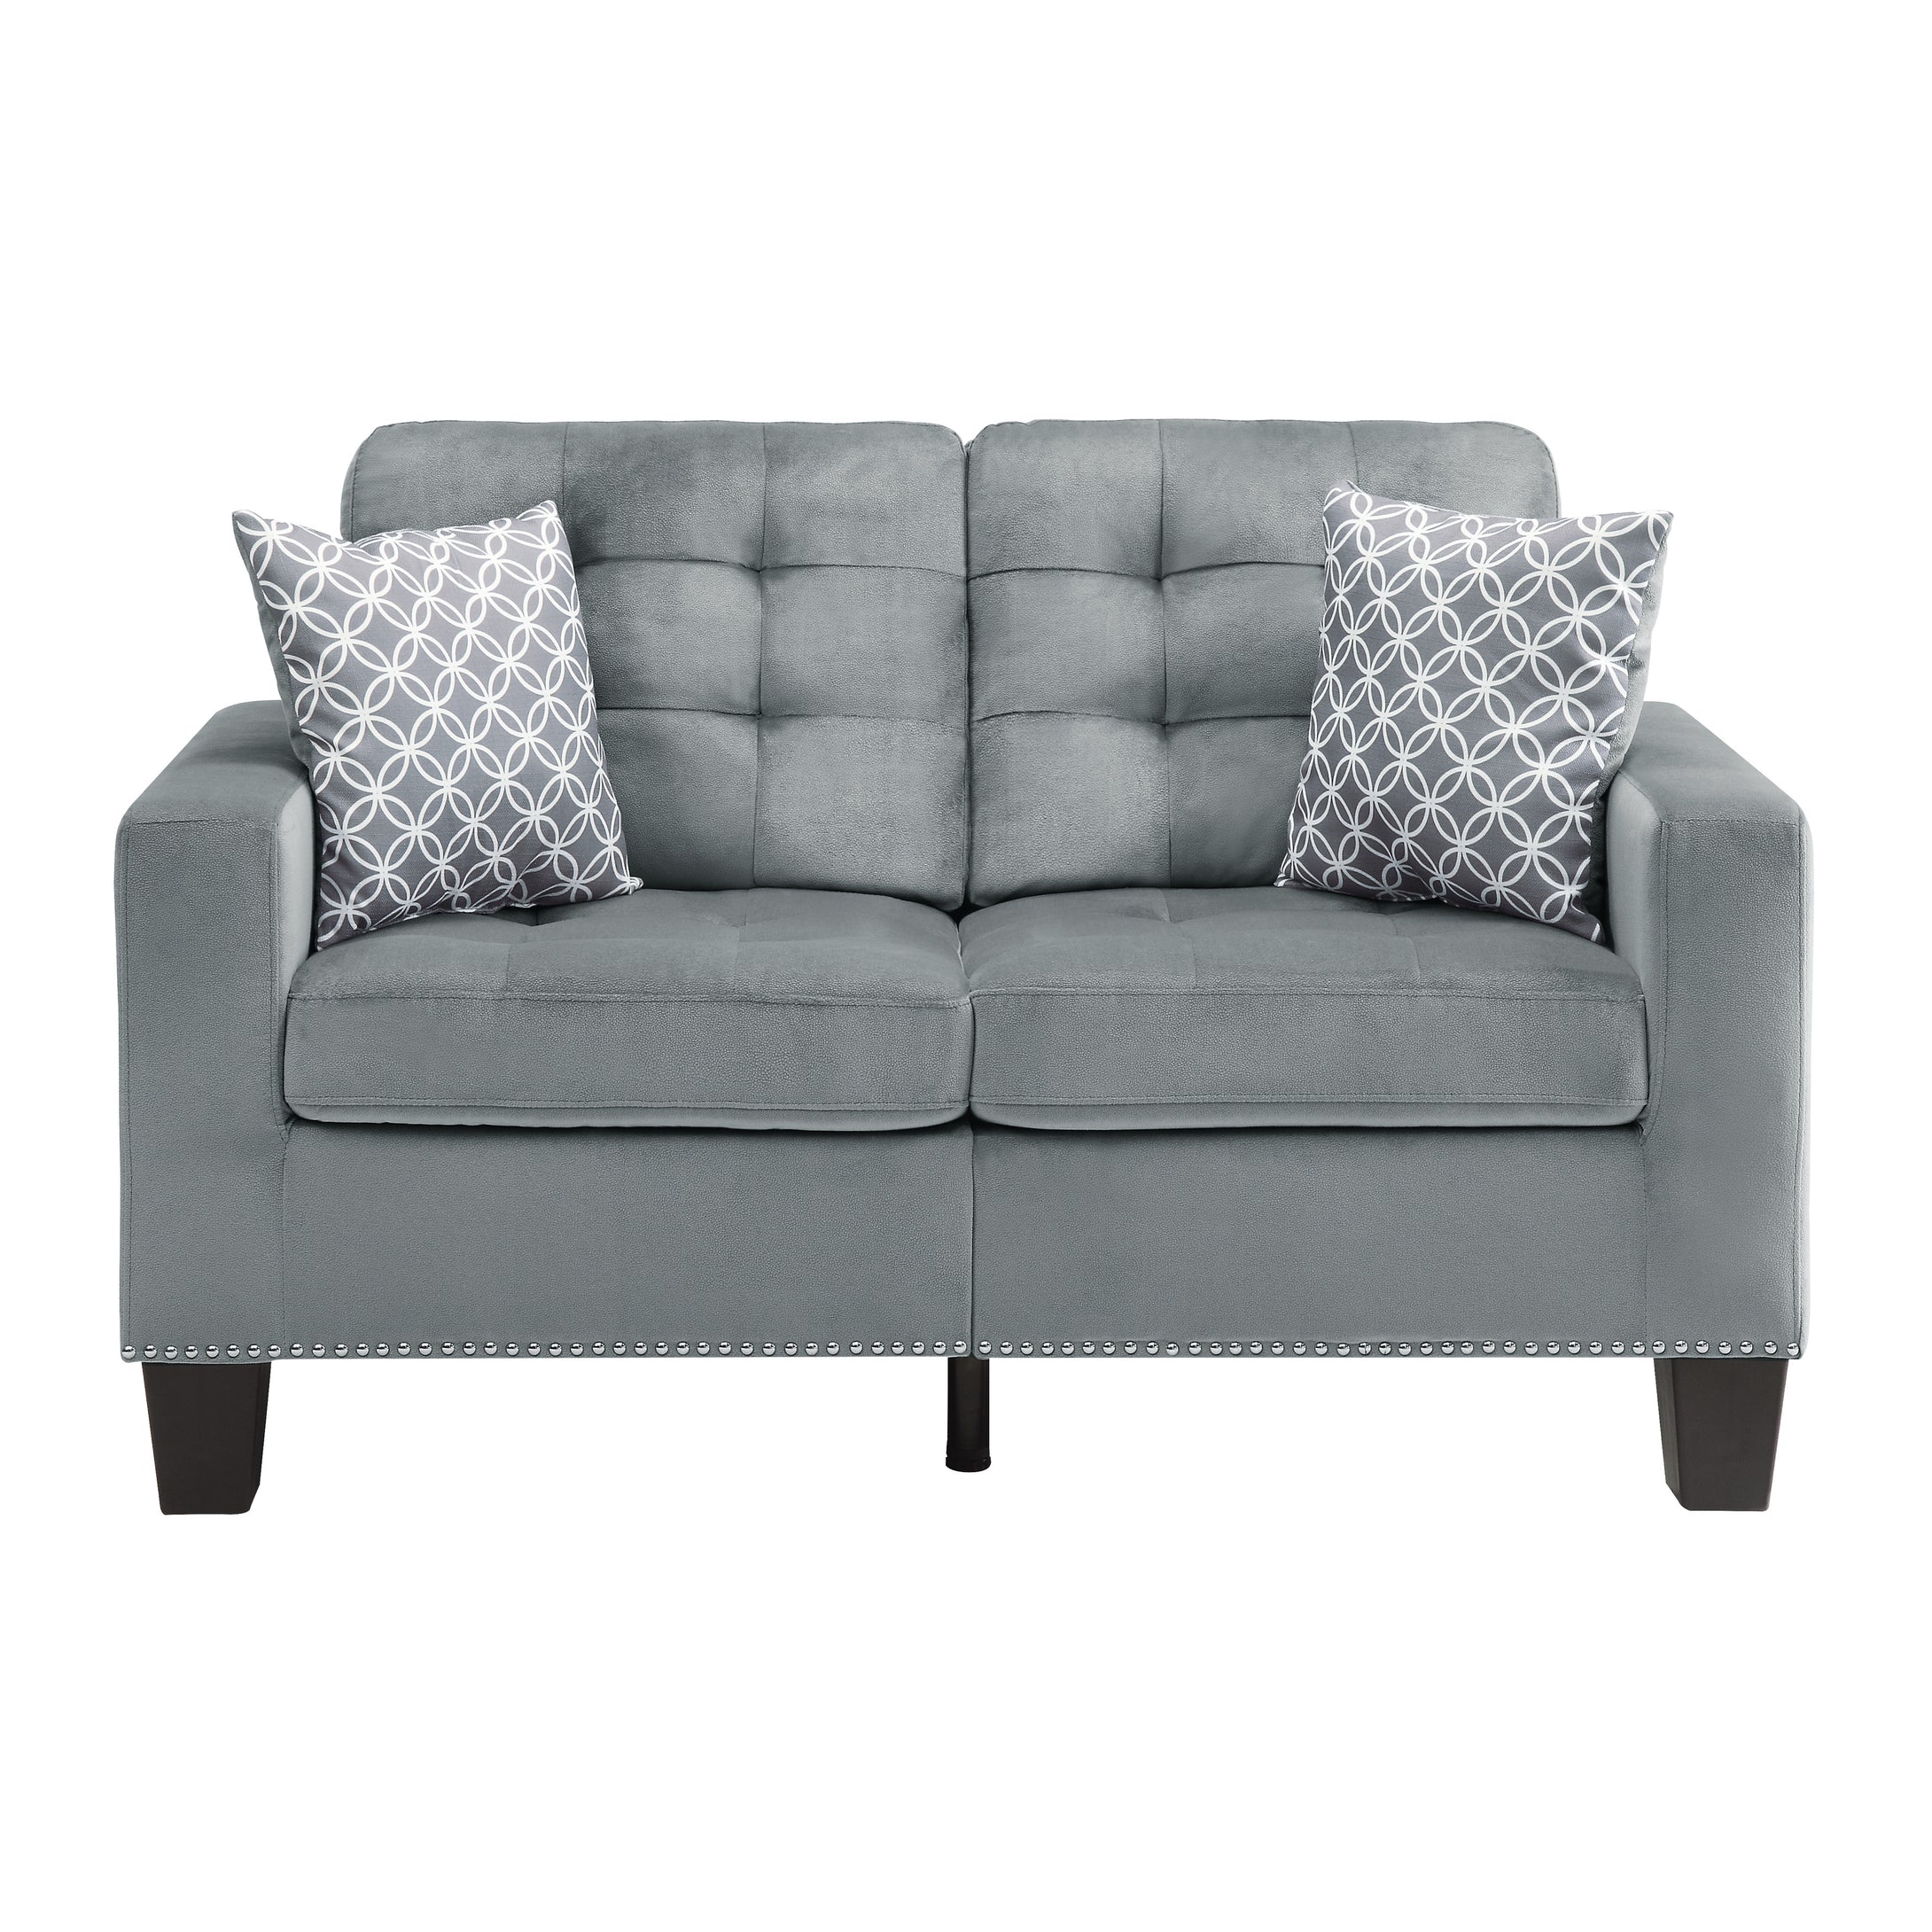 9957GY-2 Love Seat